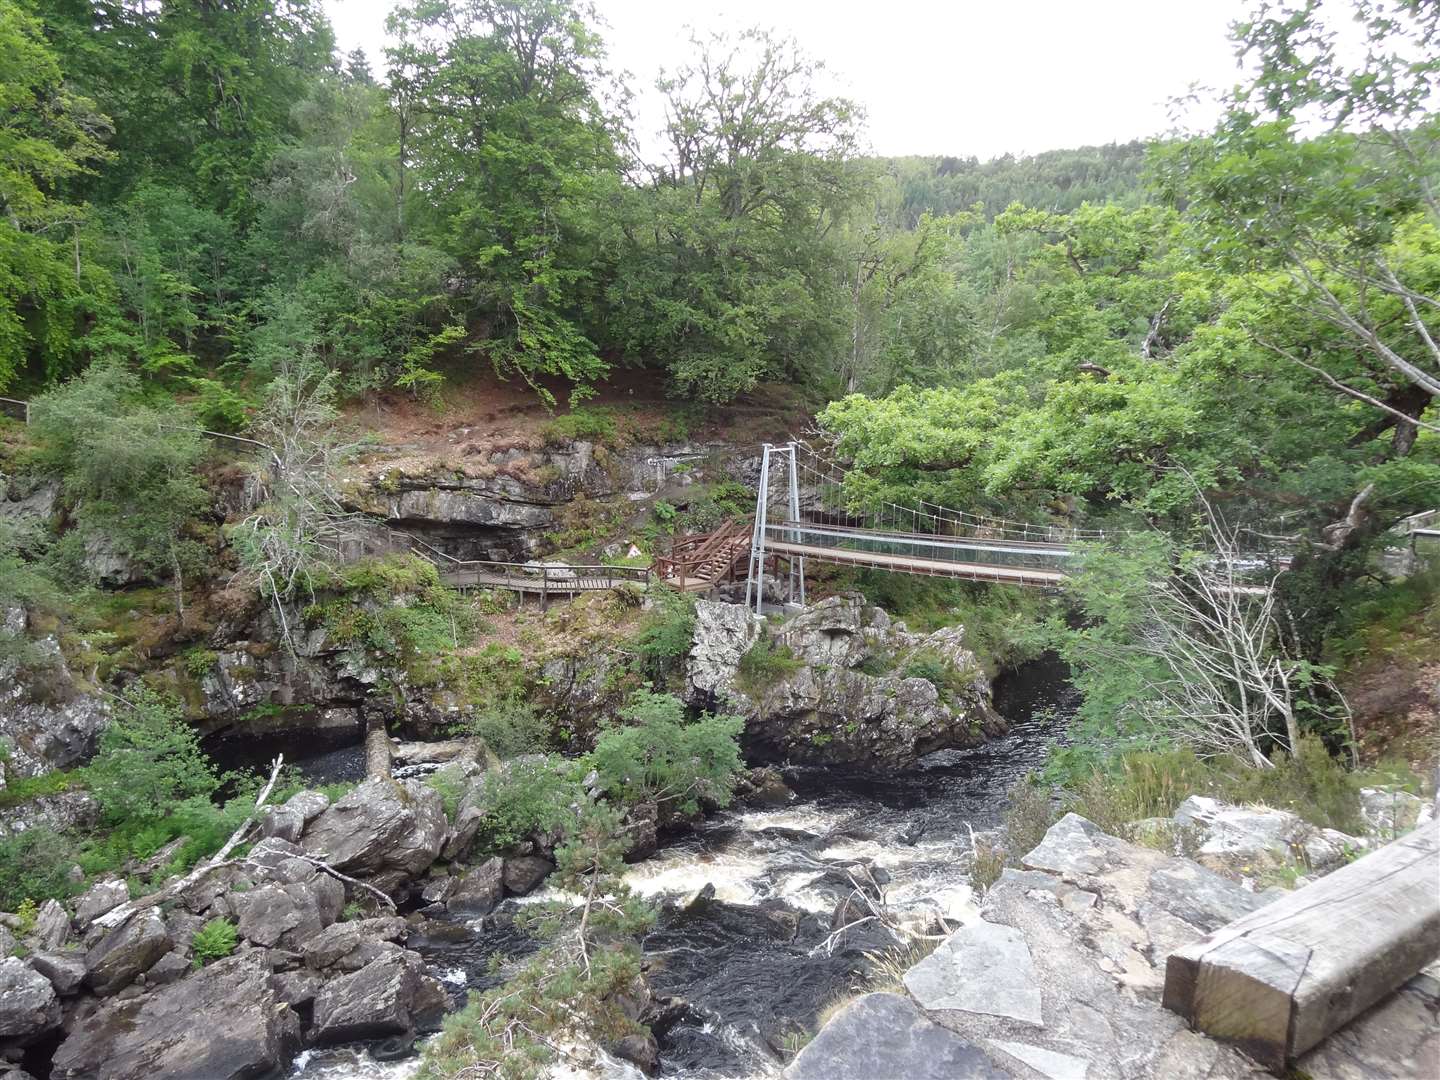 The bridge over the Black Water at Rogie Falls.